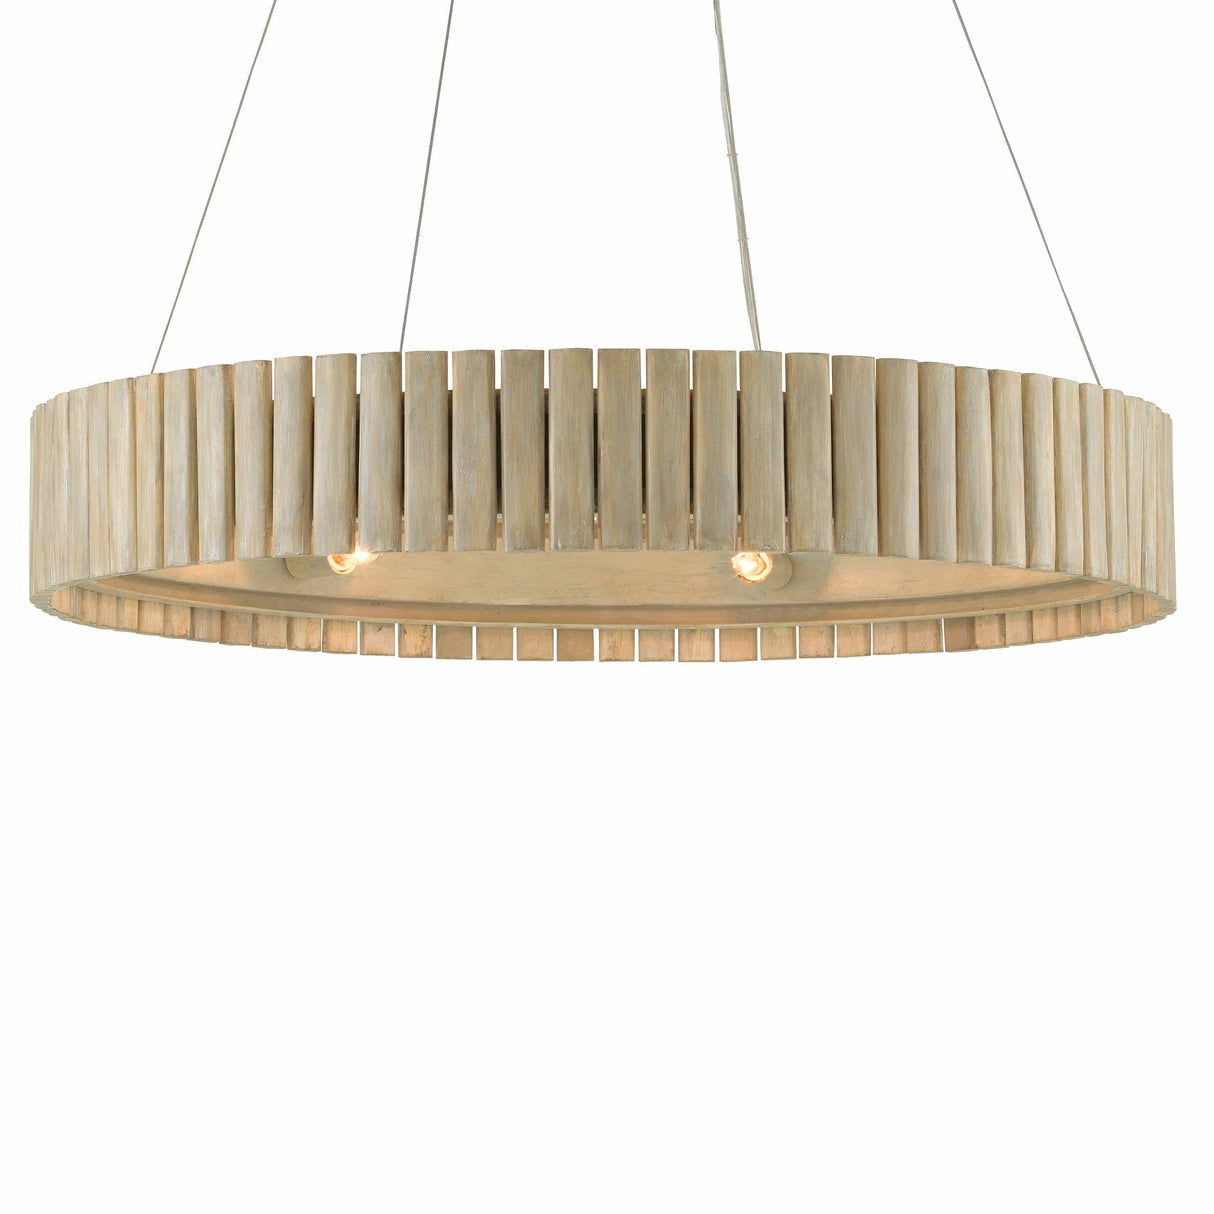 Currey & Company Tetterby Chandelier Lighting currey-co-9000-0646